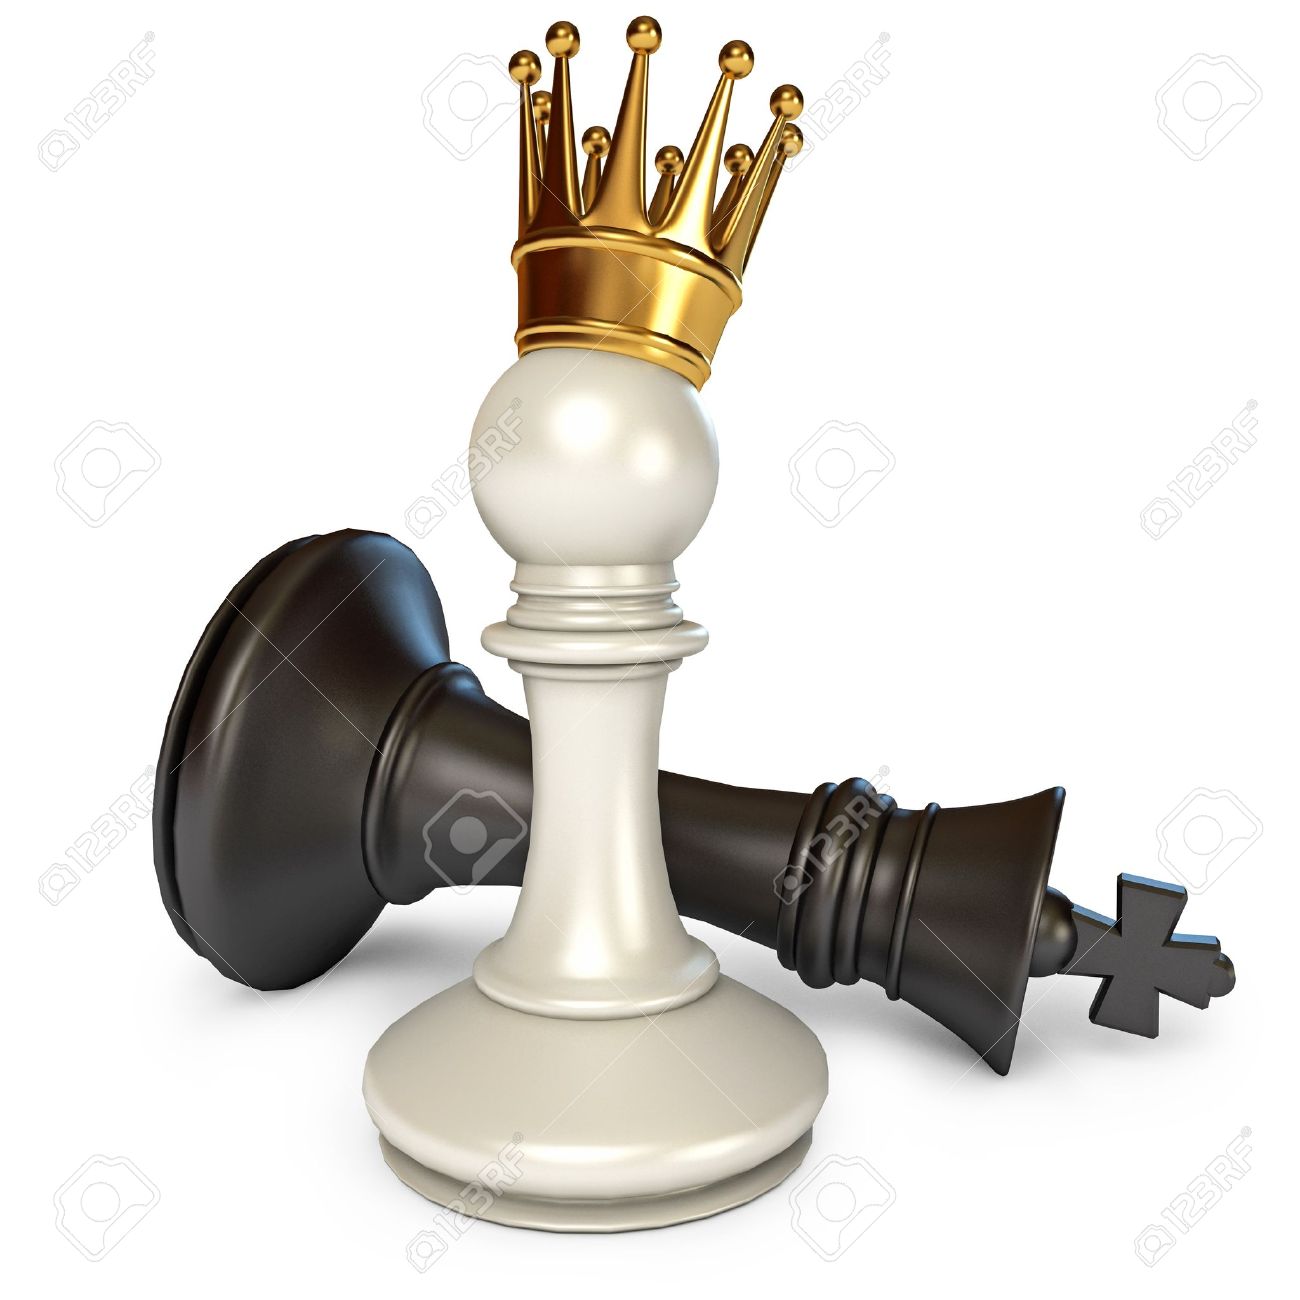 Checkmate. Stock image from Google Images.